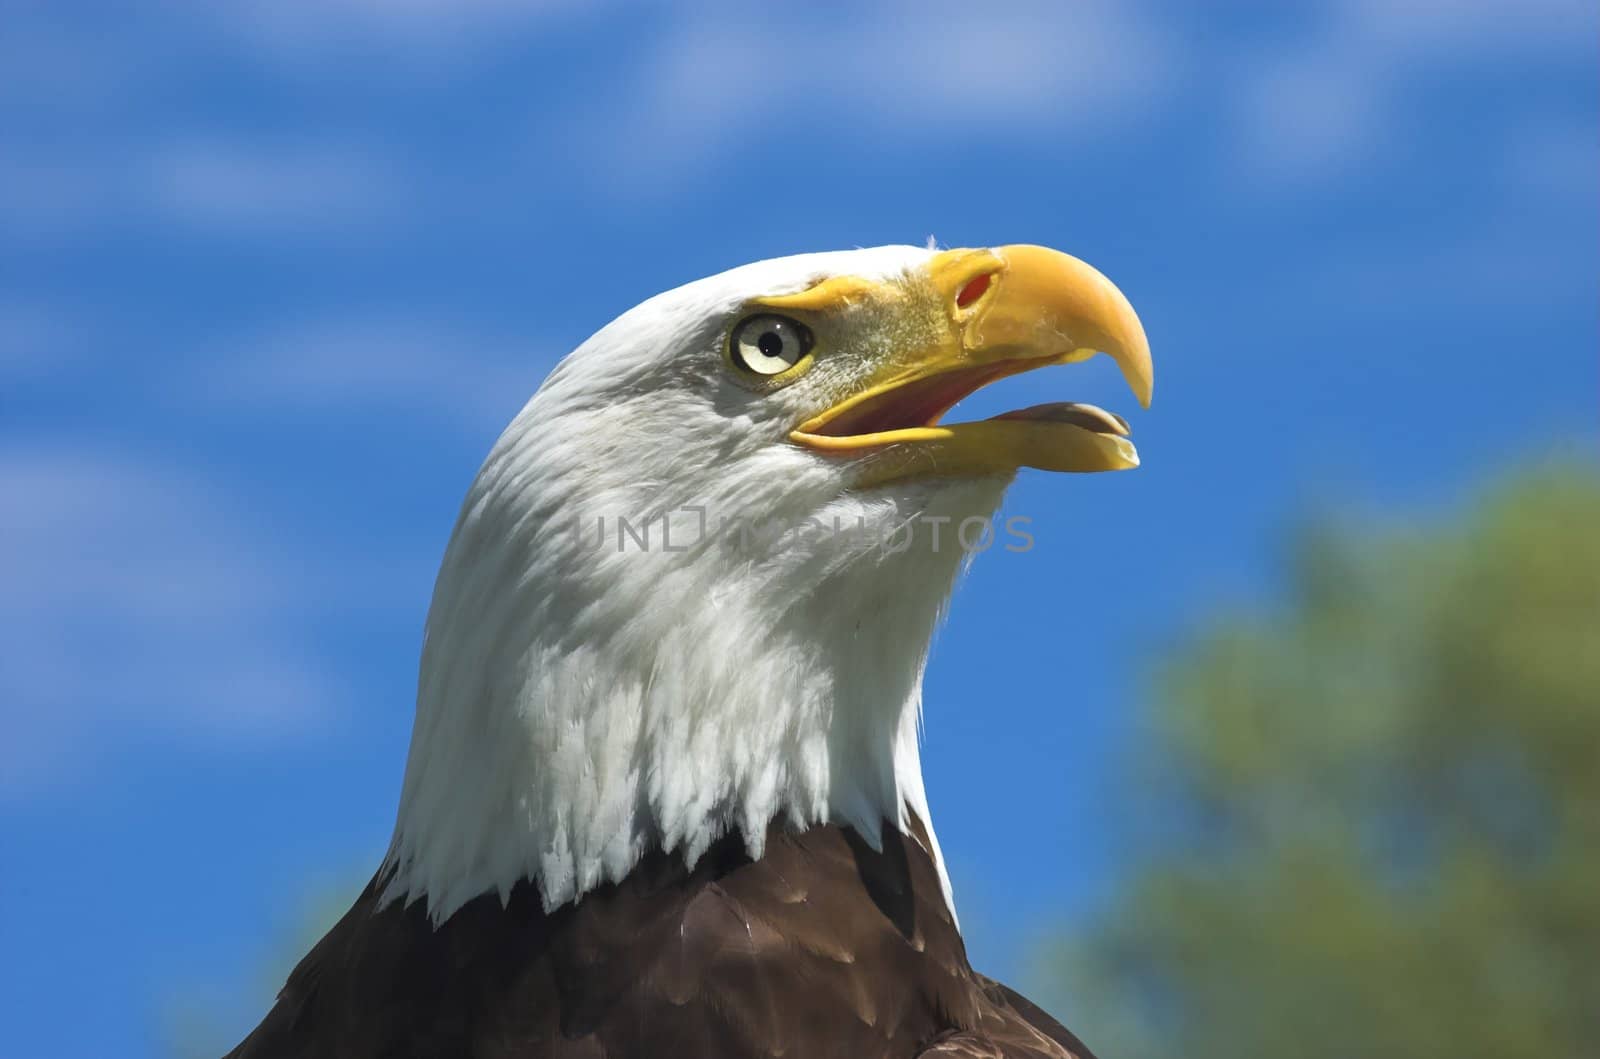 Profile headshot of American Bald Eagle looking in the distance against a bright blue sky